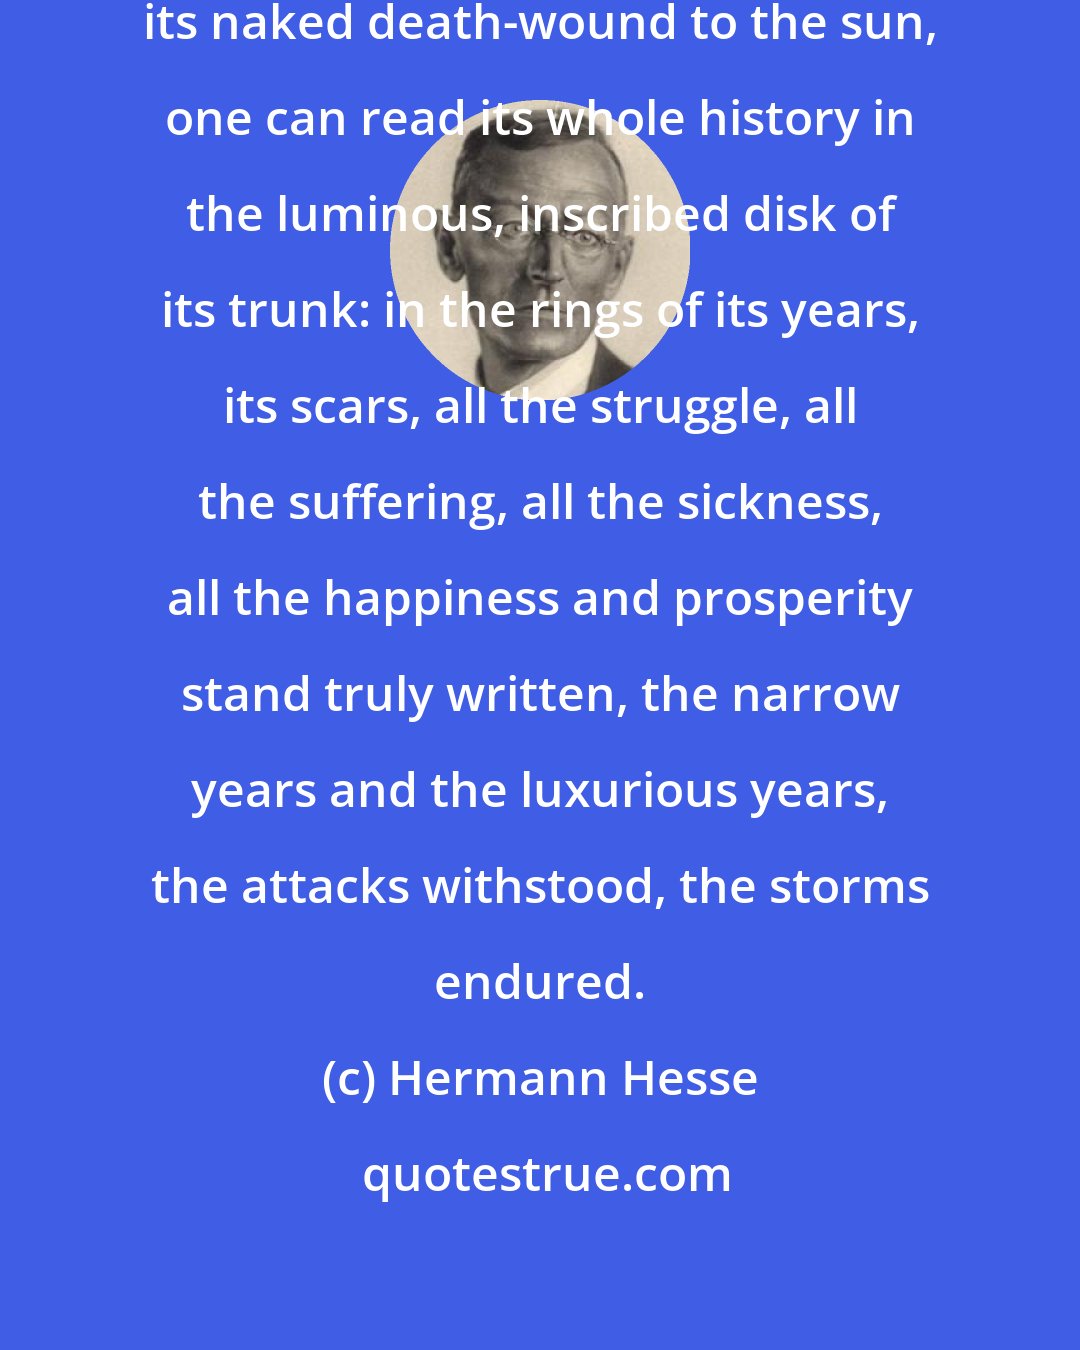 Hermann Hesse: When a tree is cut down and reveals its naked death-wound to the sun, one can read its whole history in the luminous, inscribed disk of its trunk: in the rings of its years, its scars, all the struggle, all the suffering, all the sickness, all the happiness and prosperity stand truly written, the narrow years and the luxurious years, the attacks withstood, the storms endured.